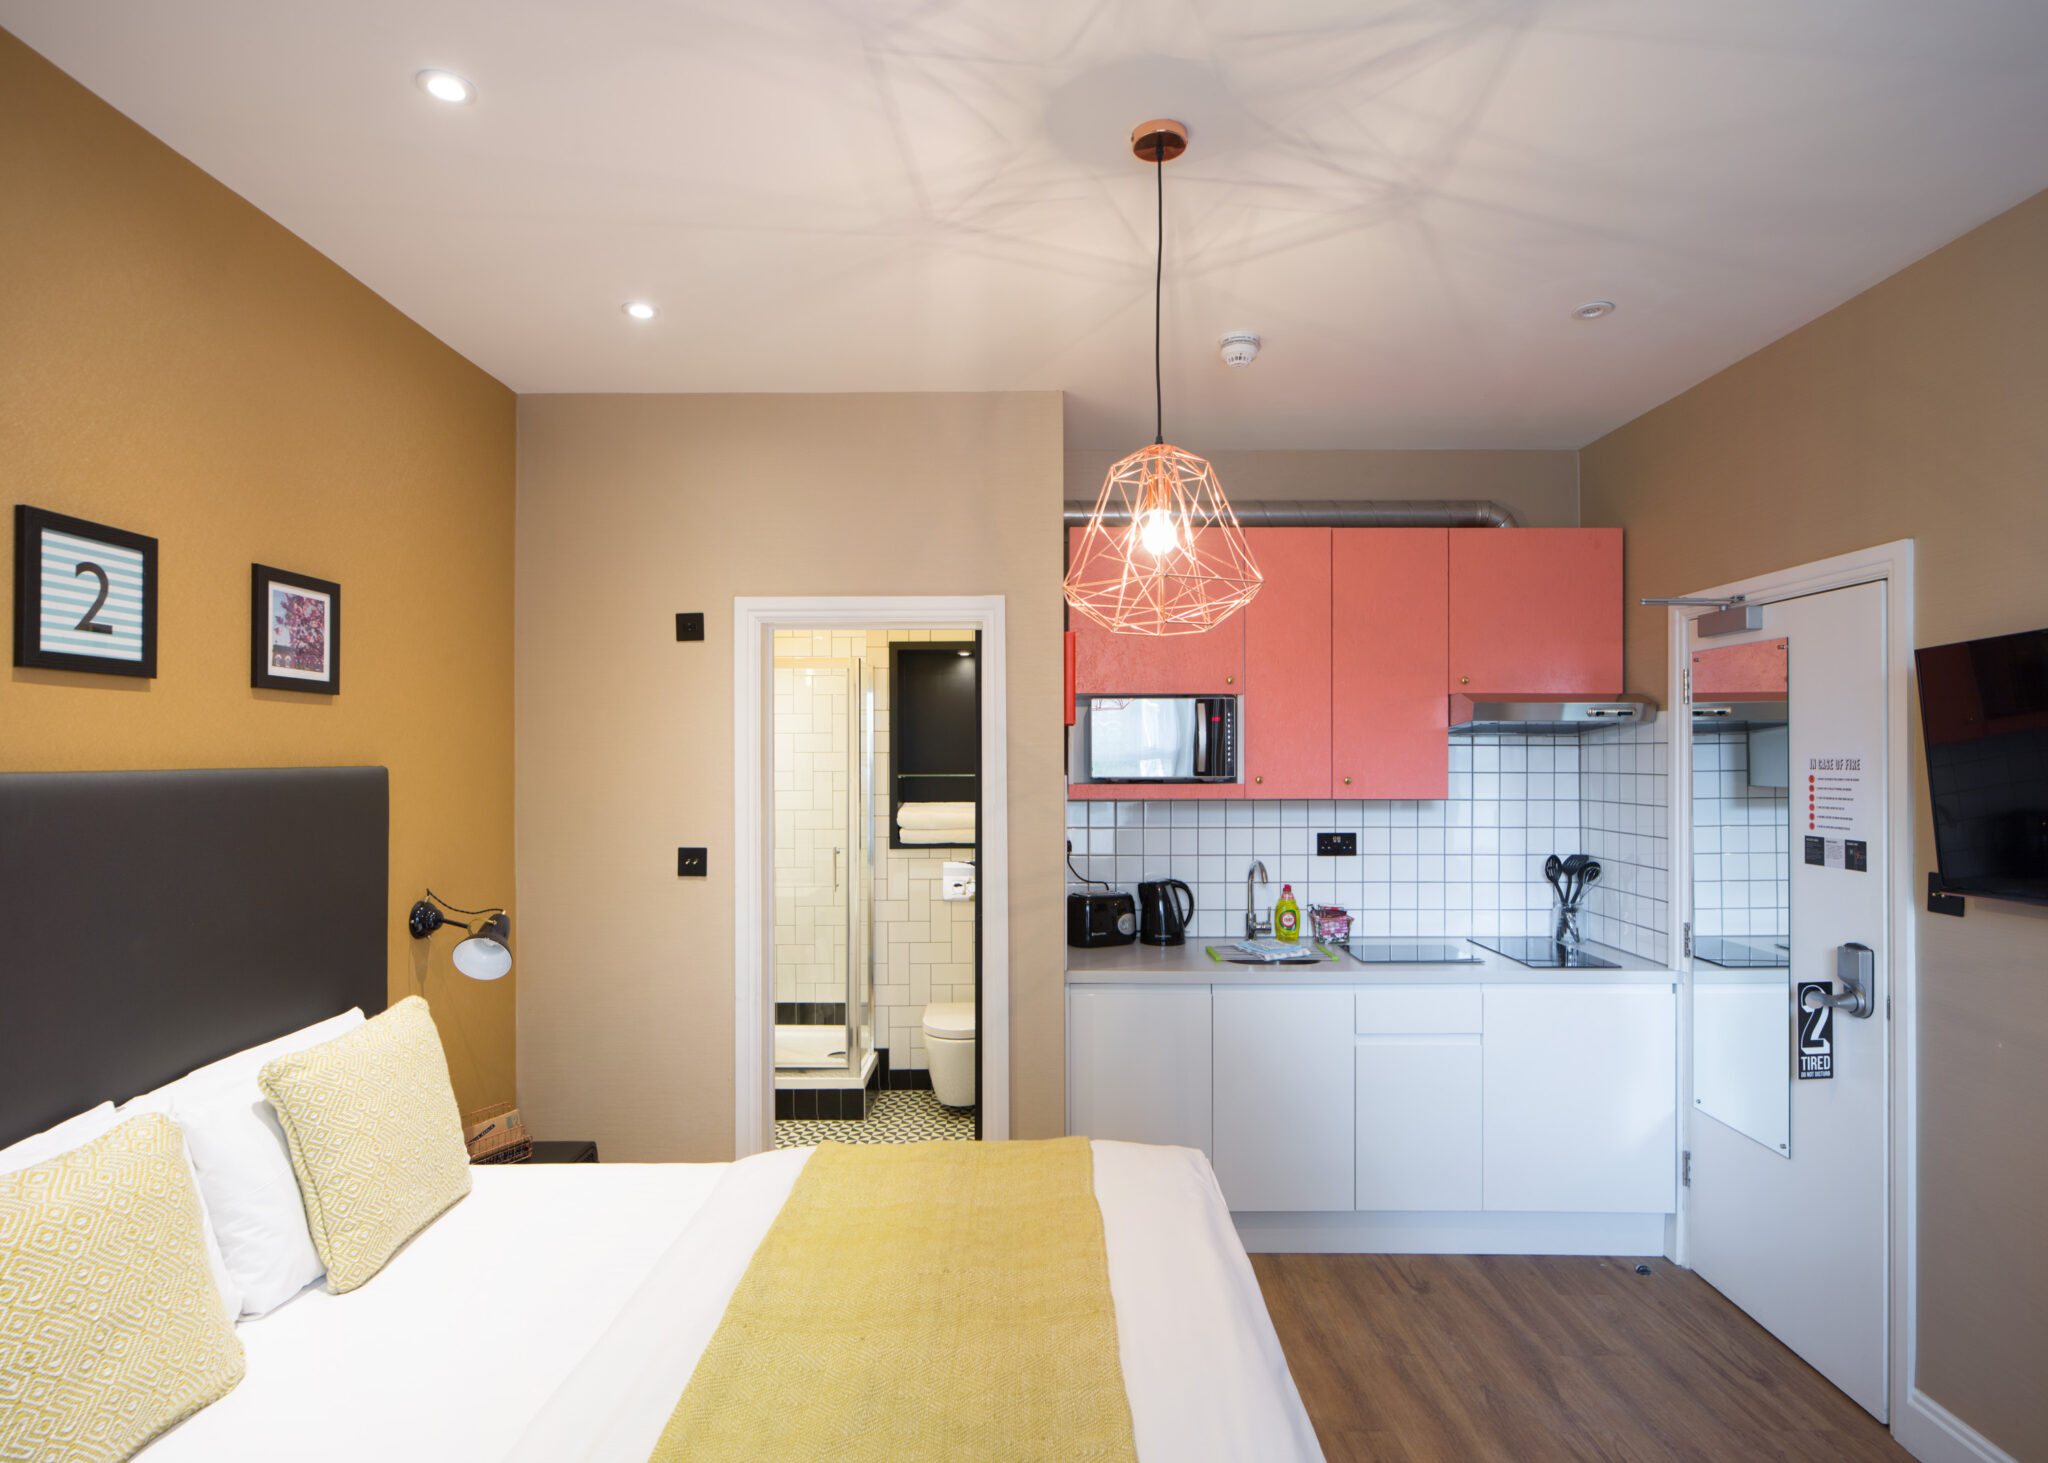 Enjoy-modern-comforts-at-our-Serviced-Accommodation-West-London.-Book-Room2-Hammersmith-Aparthotel-for-short-stays-and-corporate-relocation.